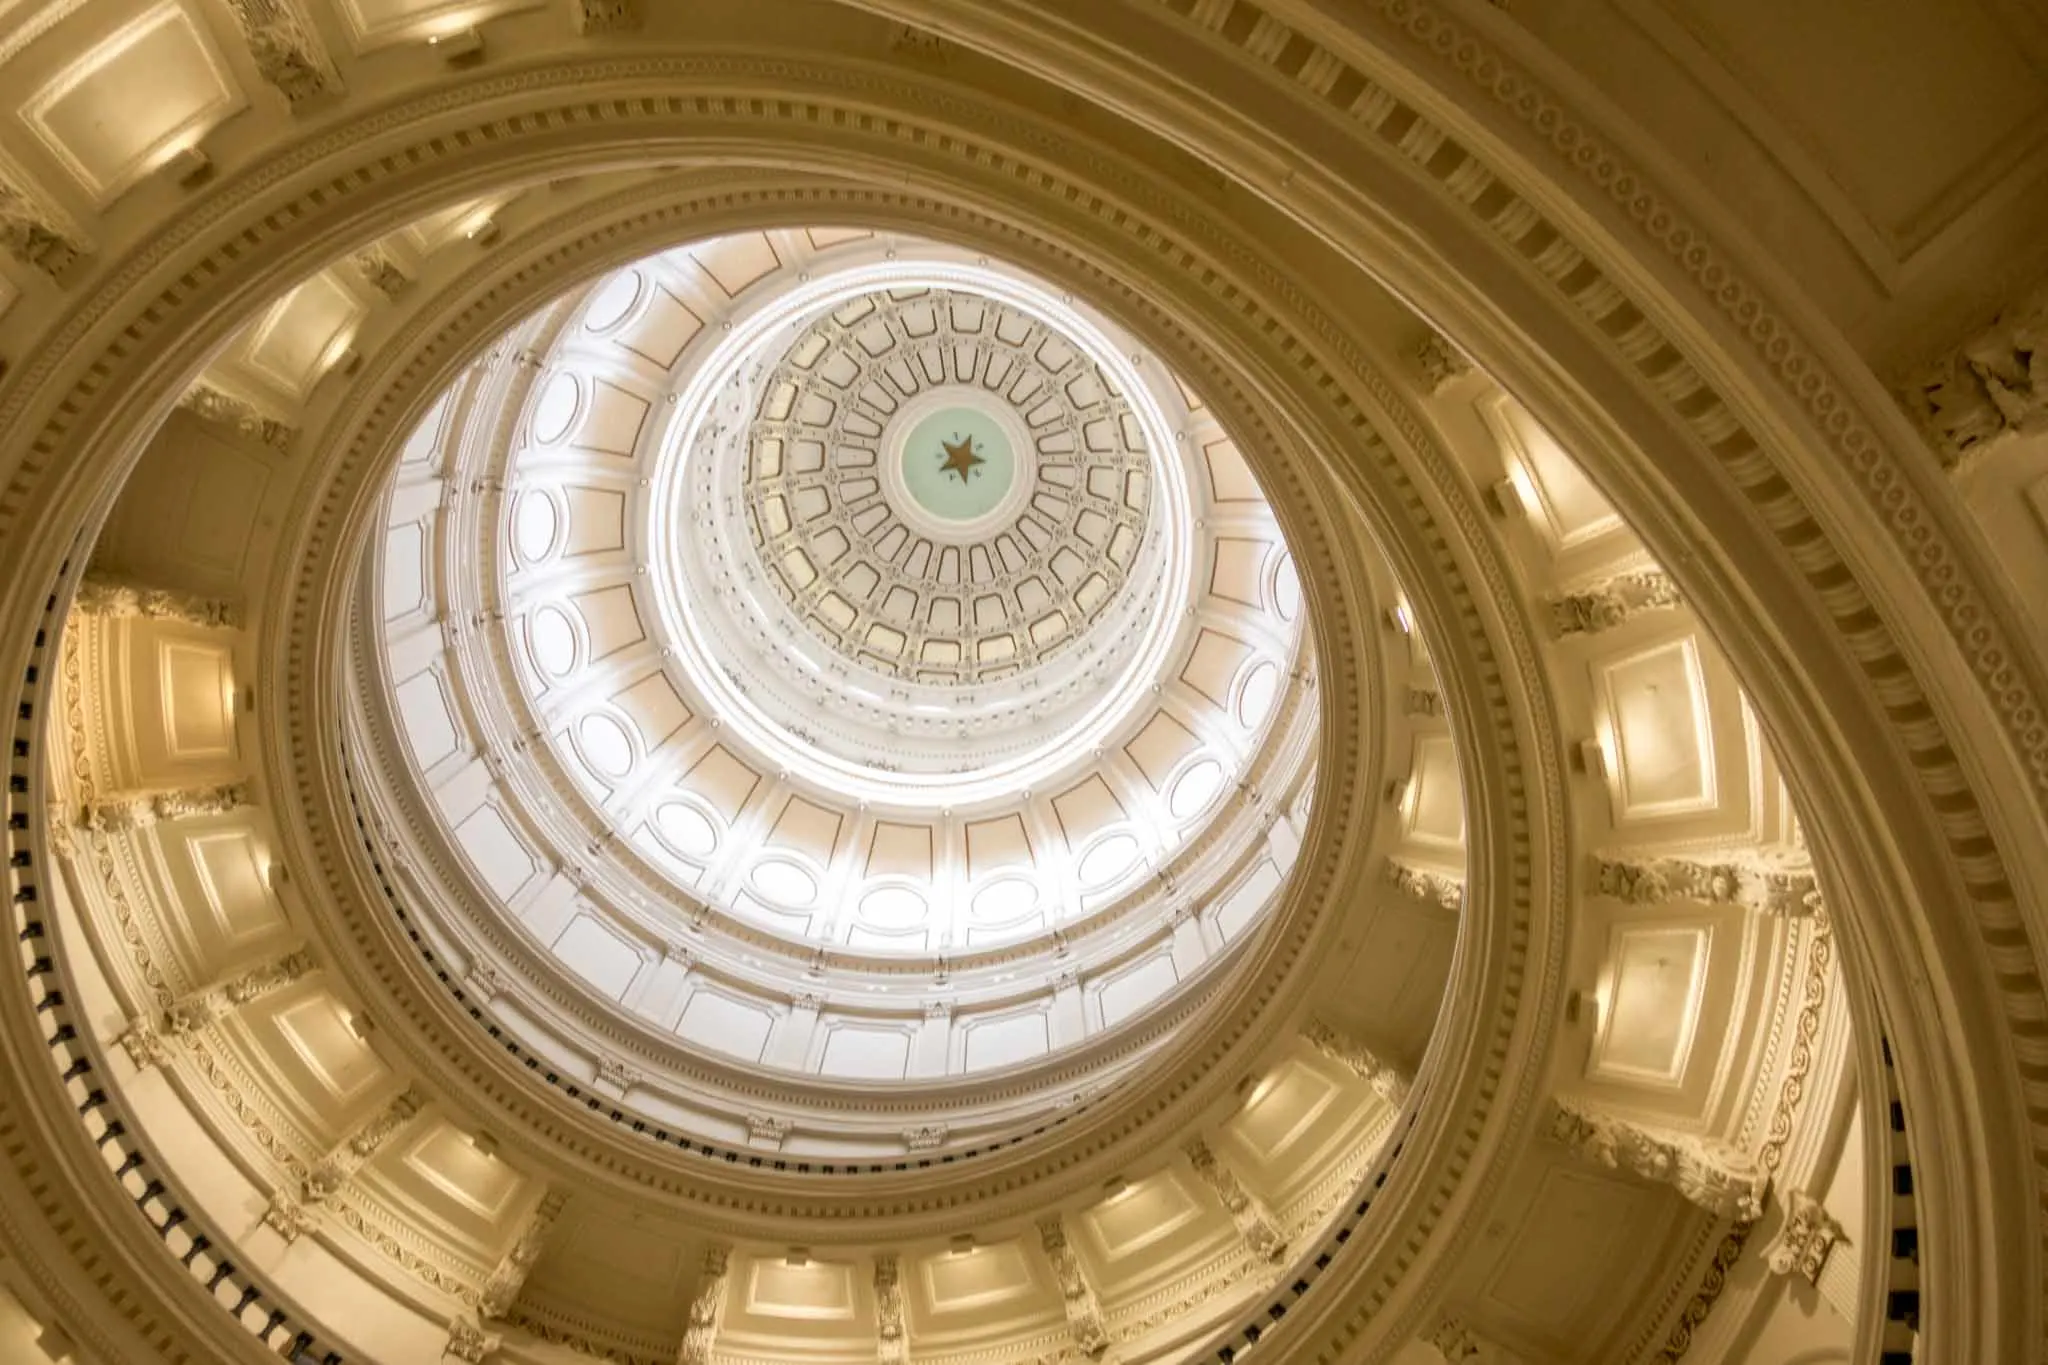 Circular pattern inside the dome of the Texas State Capitol building in Austin TX